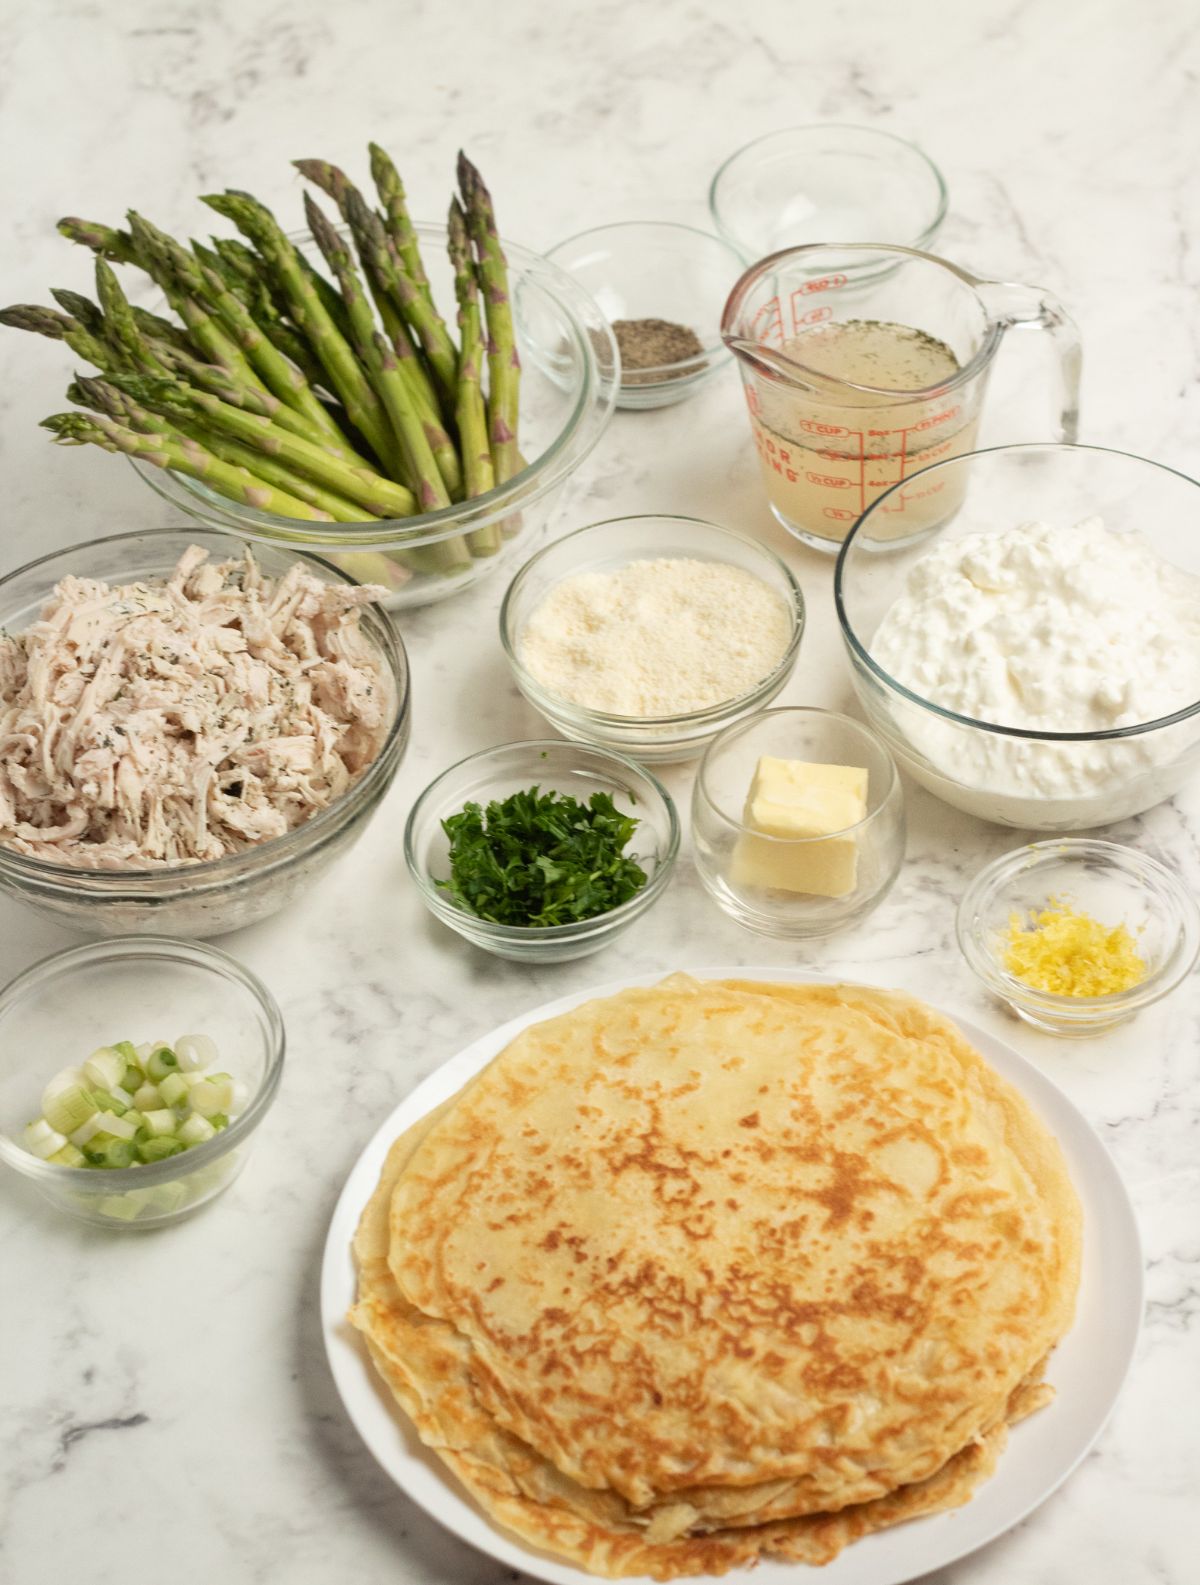 Ingredients used to make Chicken Asparagus Crepes.